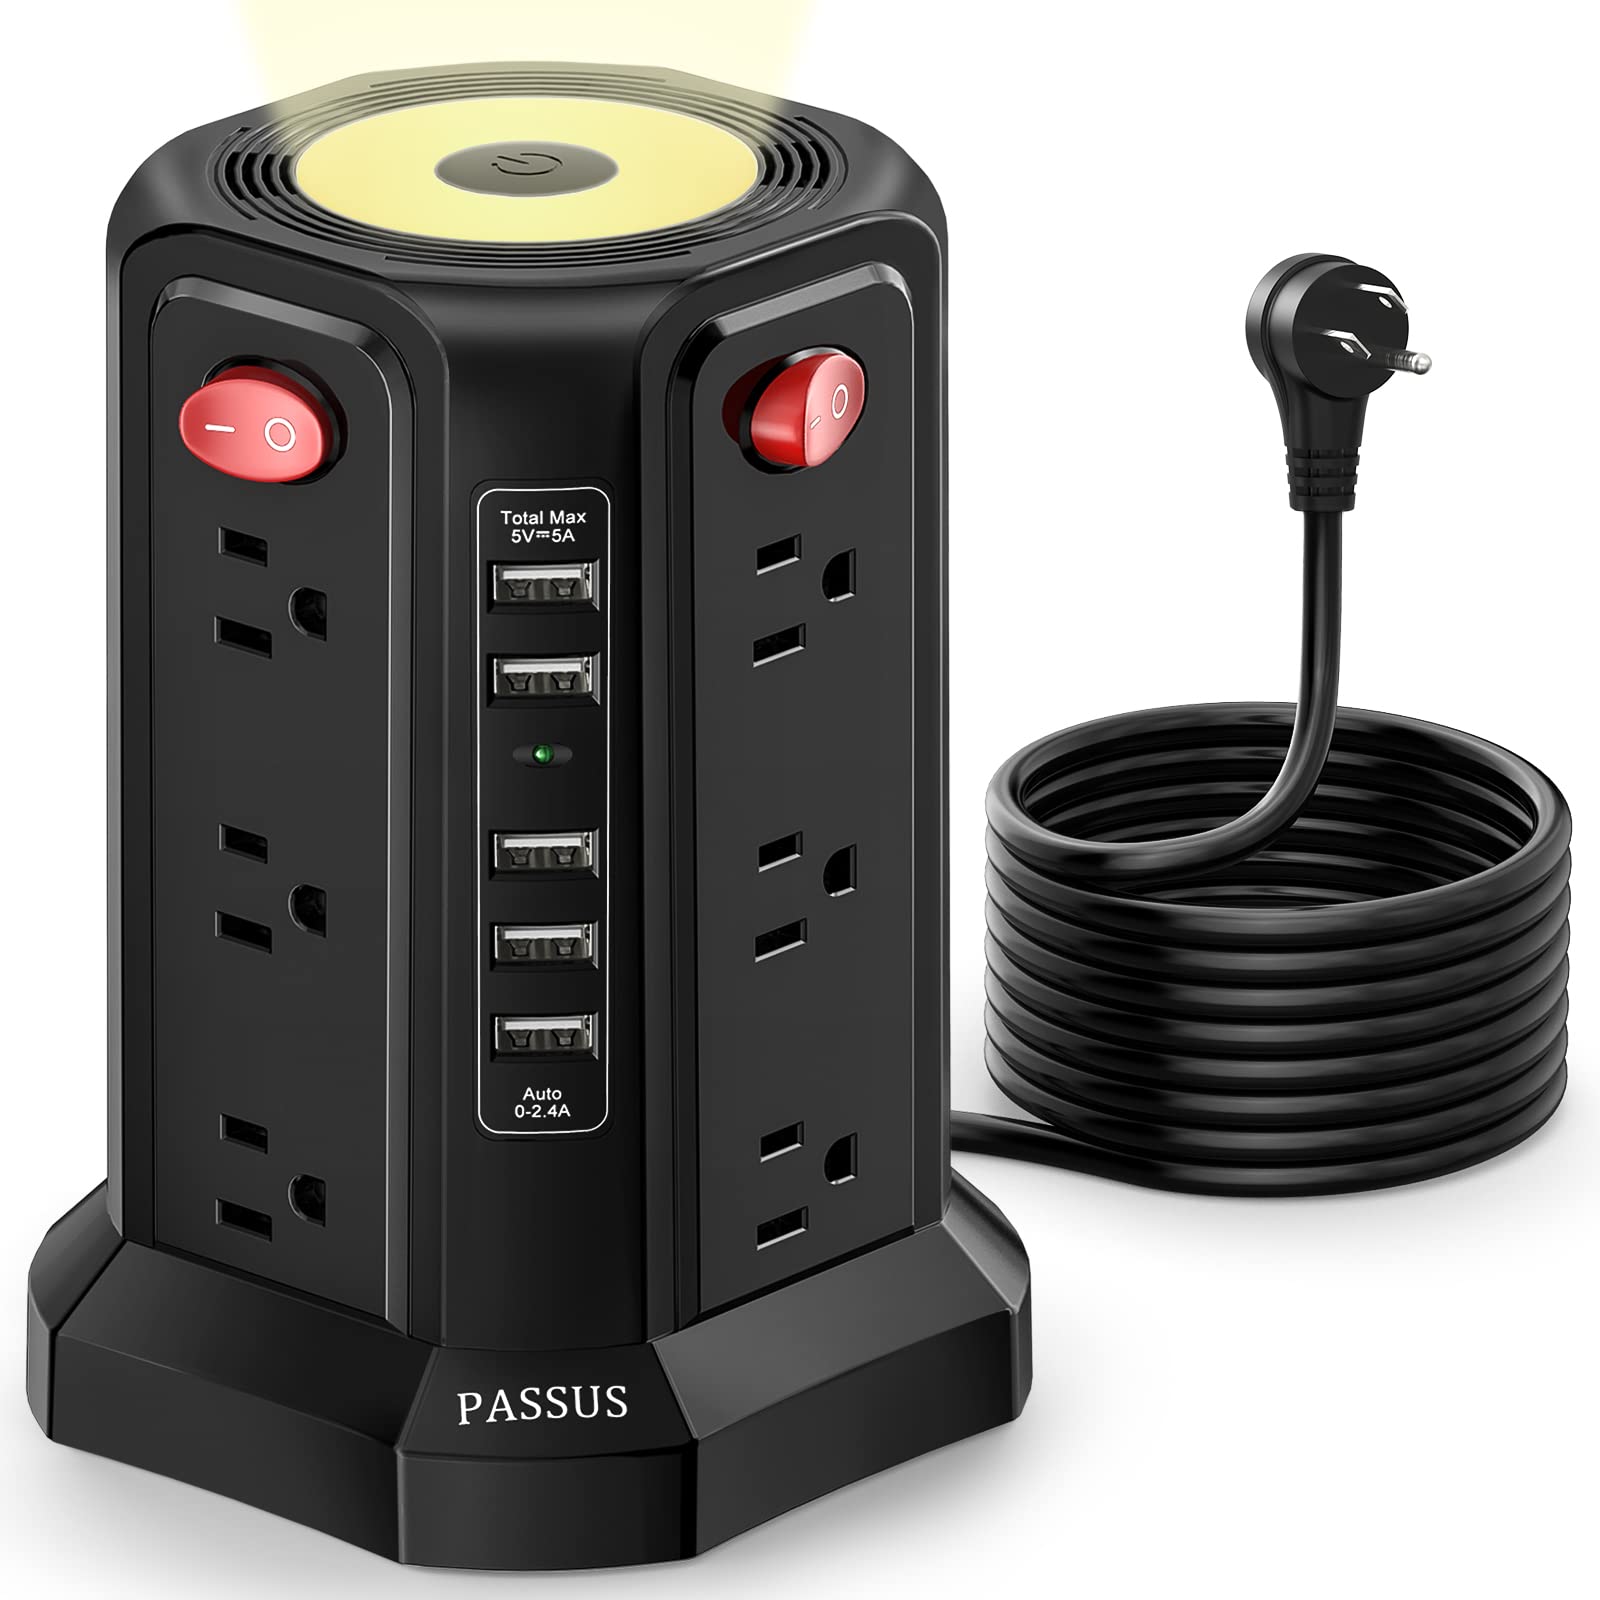 PASSUS Surge Protector Power Strip Tower with 5 USB Ports and Night Light, 10FT Extension Cord with 12 AC Multiple Outlets, PASSUS Powe